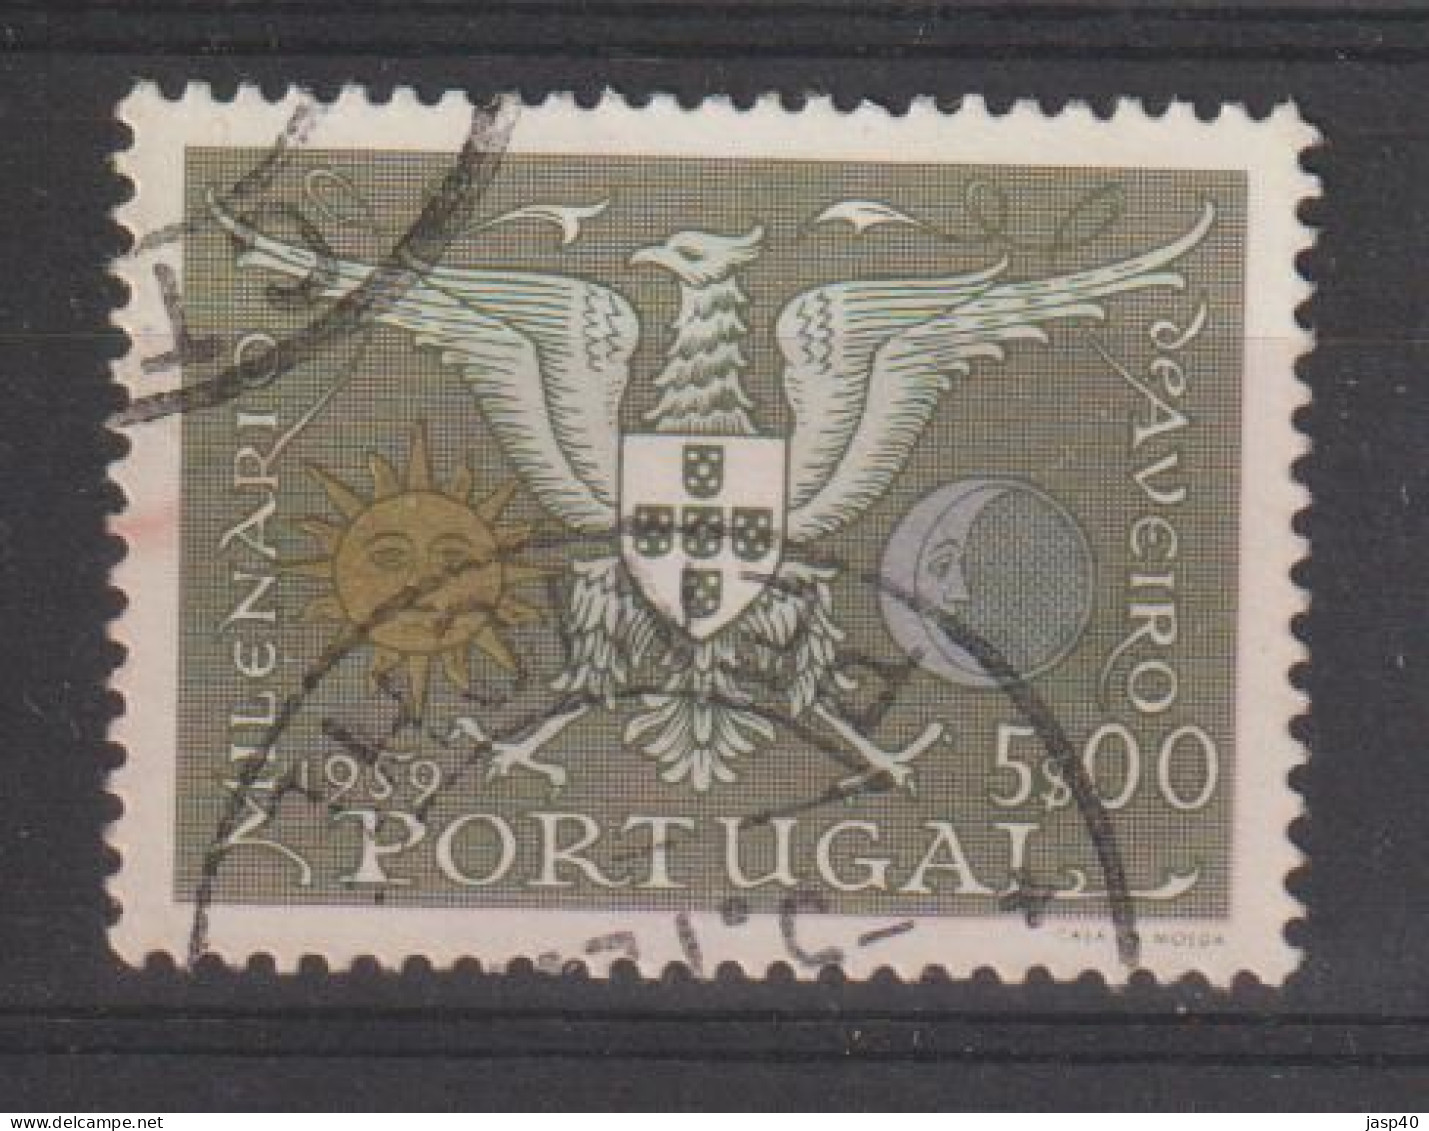 PORTUGAL 848 - POSTMARKS OF PORTUGAL - PENICHE - Used Stamps